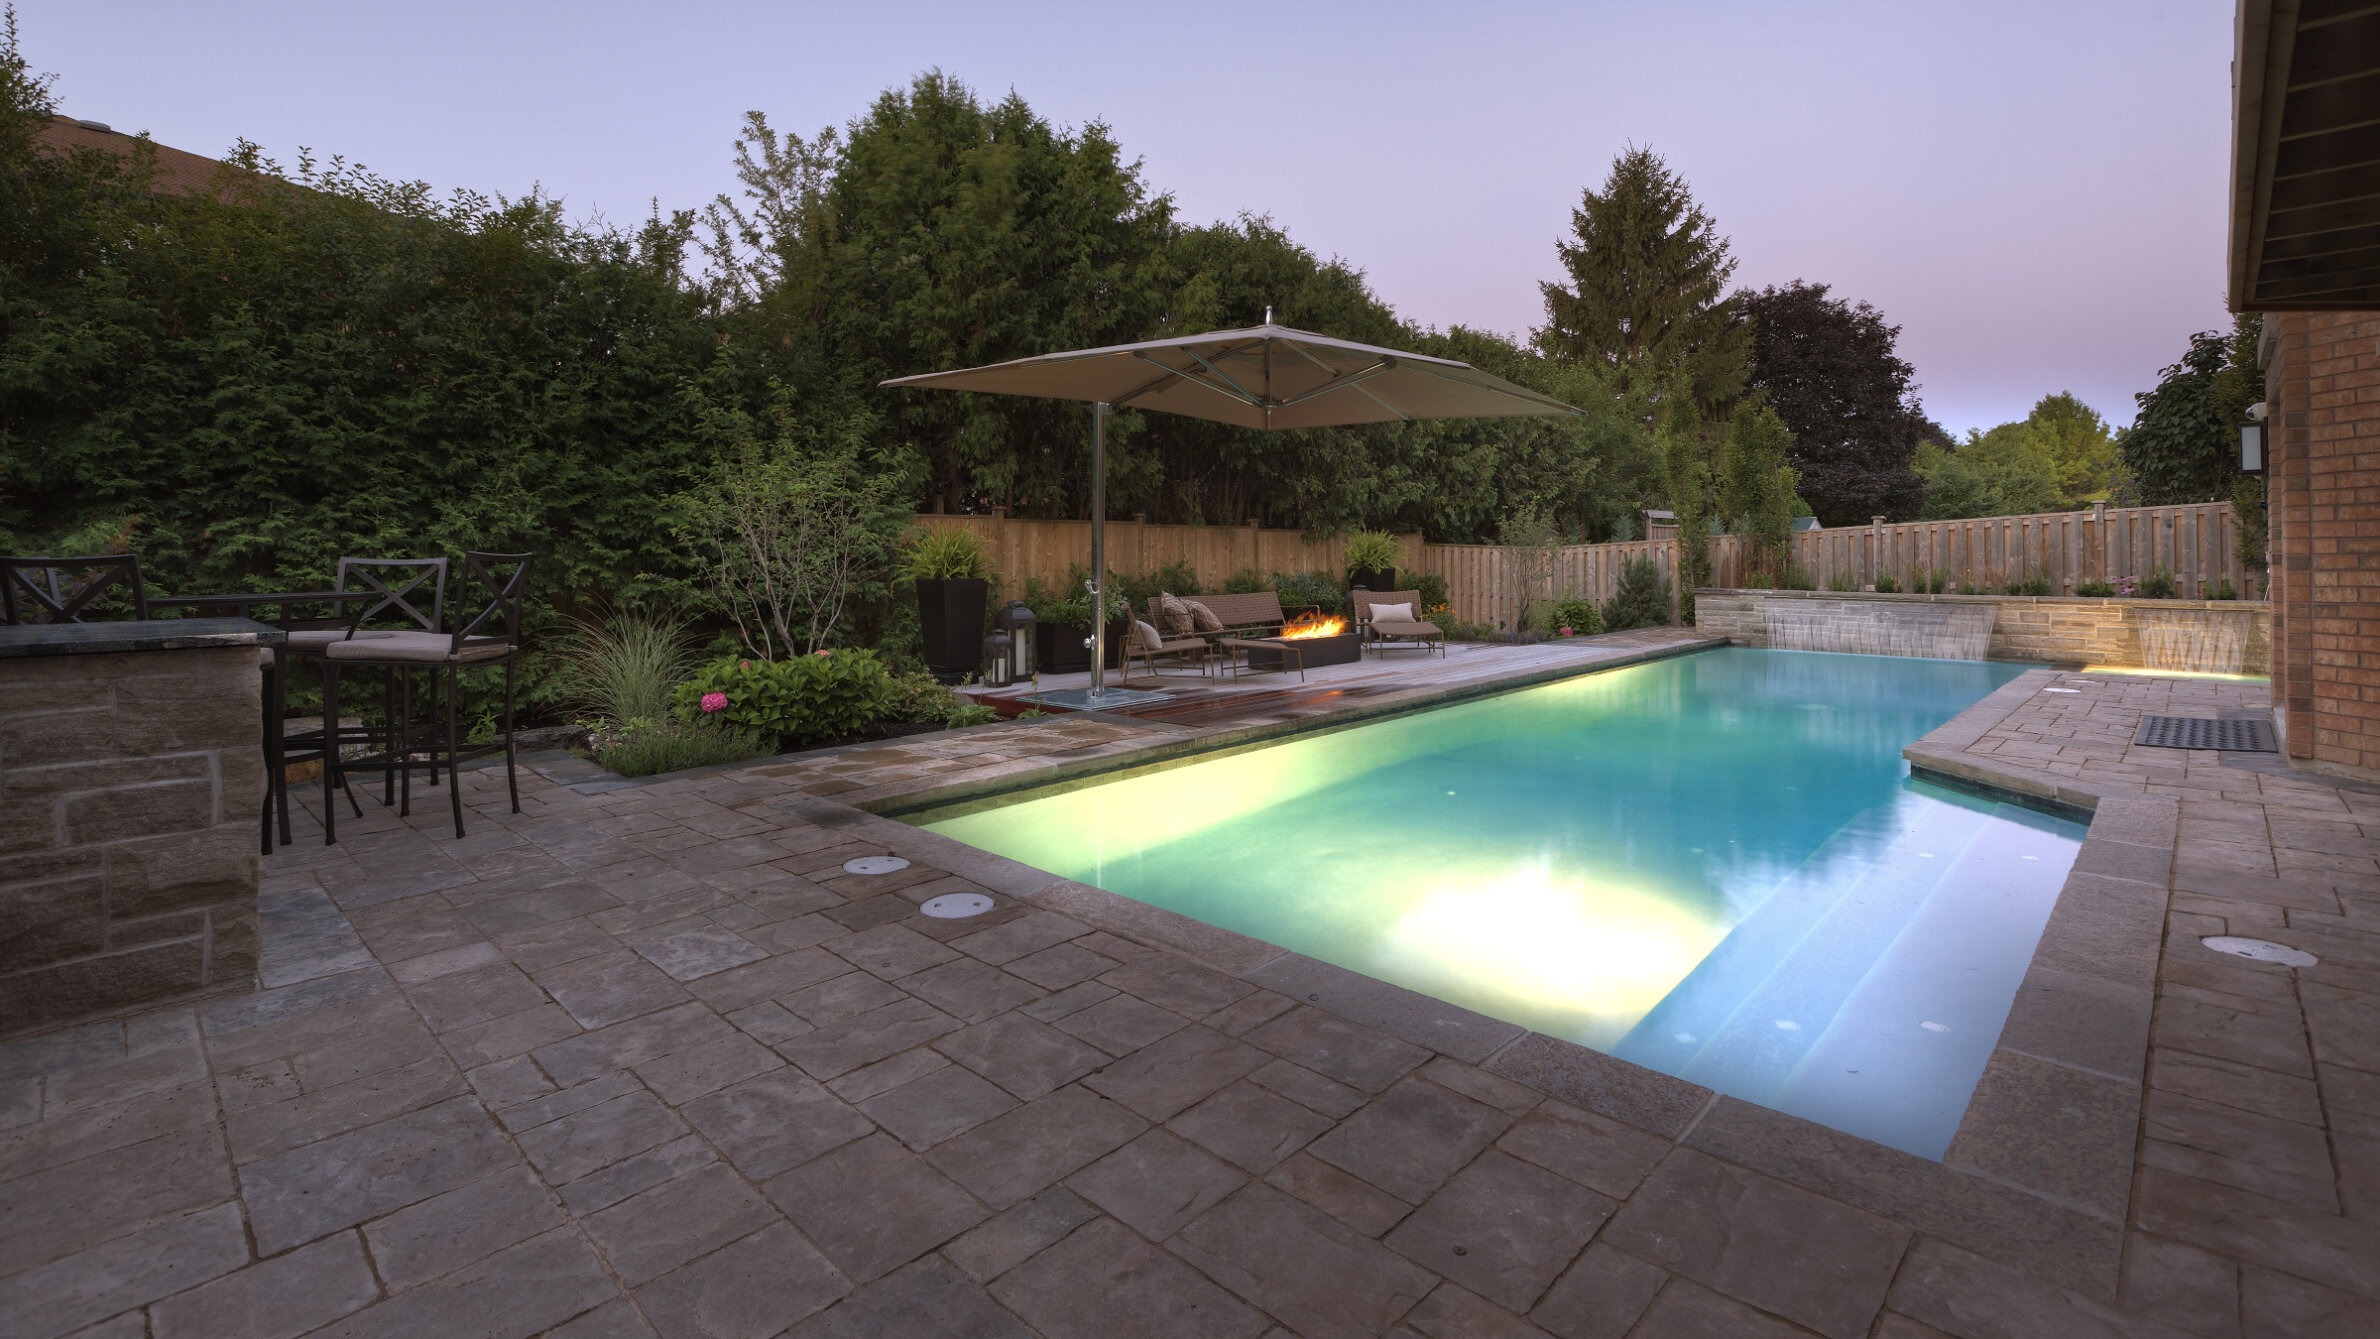 An elegant backyard at dusk, featuring a lit swimming pool, outdoor firepit seating area, patio umbrella, landscaping, and a stone patio.